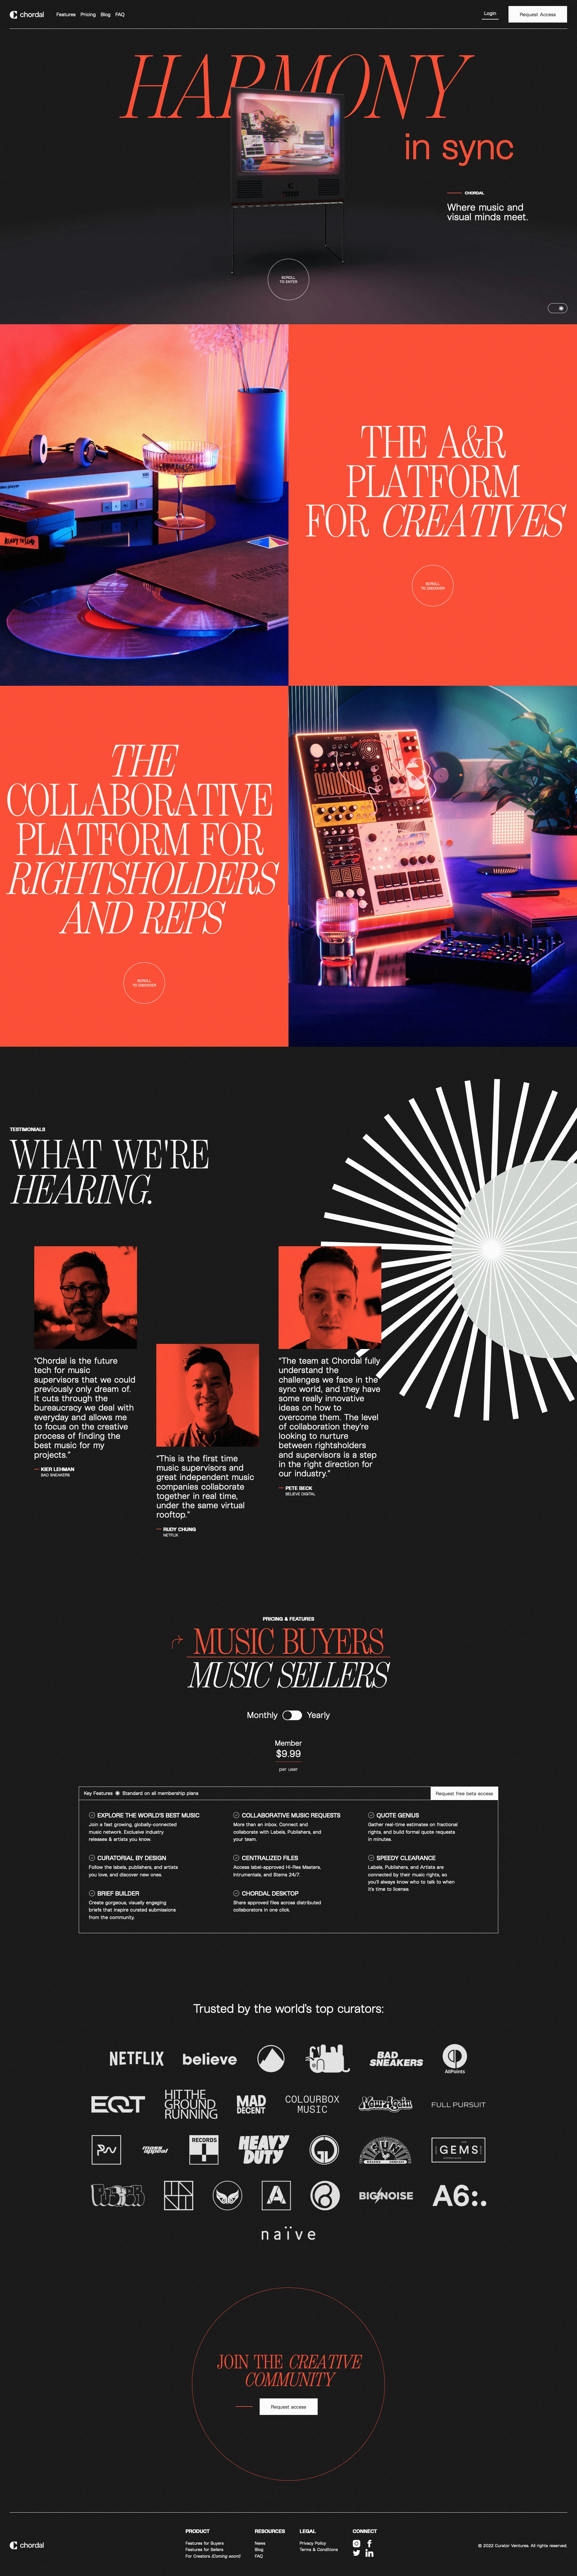 Chordal Landing Page Example: Harmony in Sync. Where music and visual minds meet.